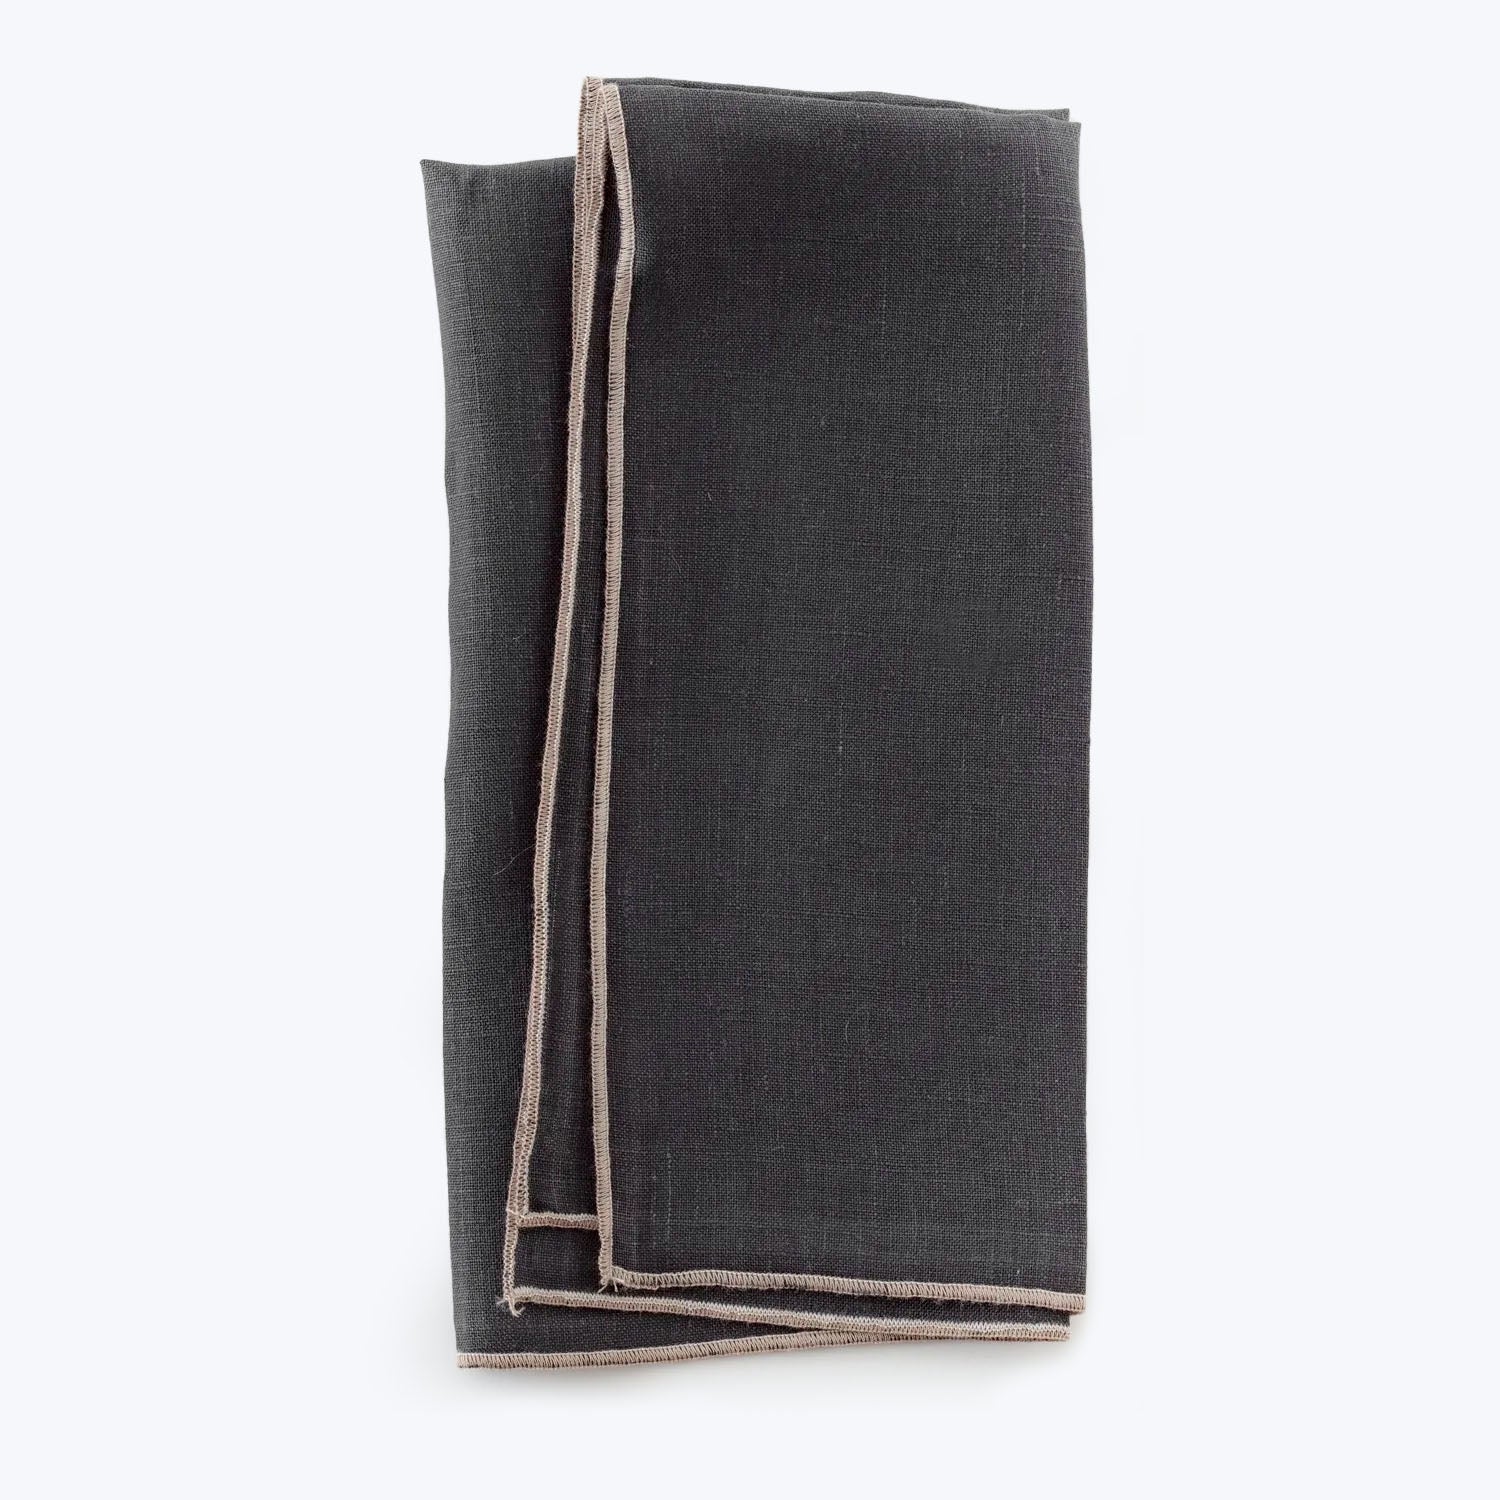 Folded dark fabric with contrasting hem against a white background.